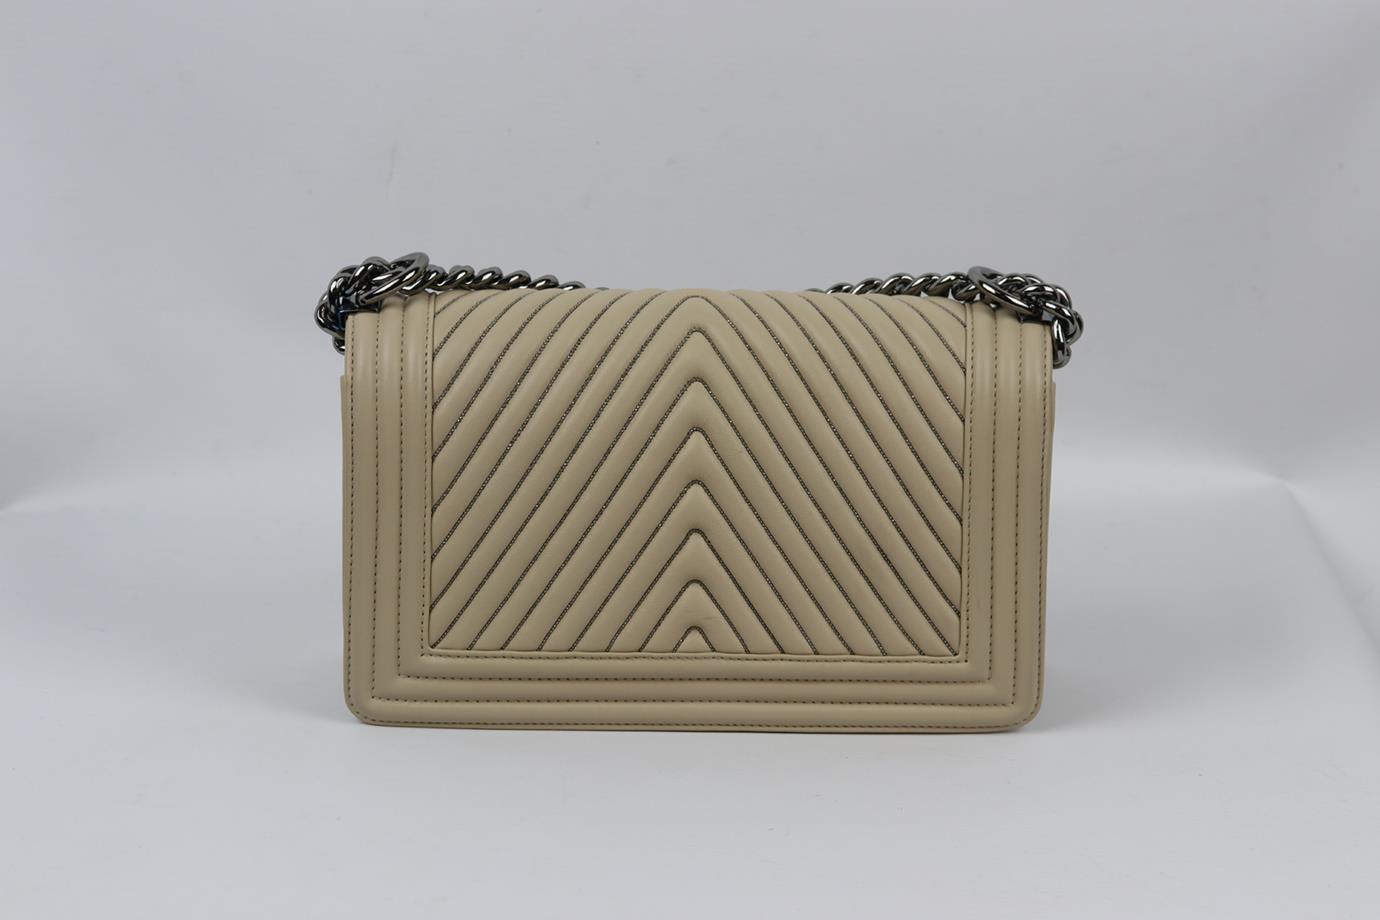 Chanel 2014 Boy Medium Embellished Chevron Leather Shoulder Bag In Excellent Condition For Sale In London, GB